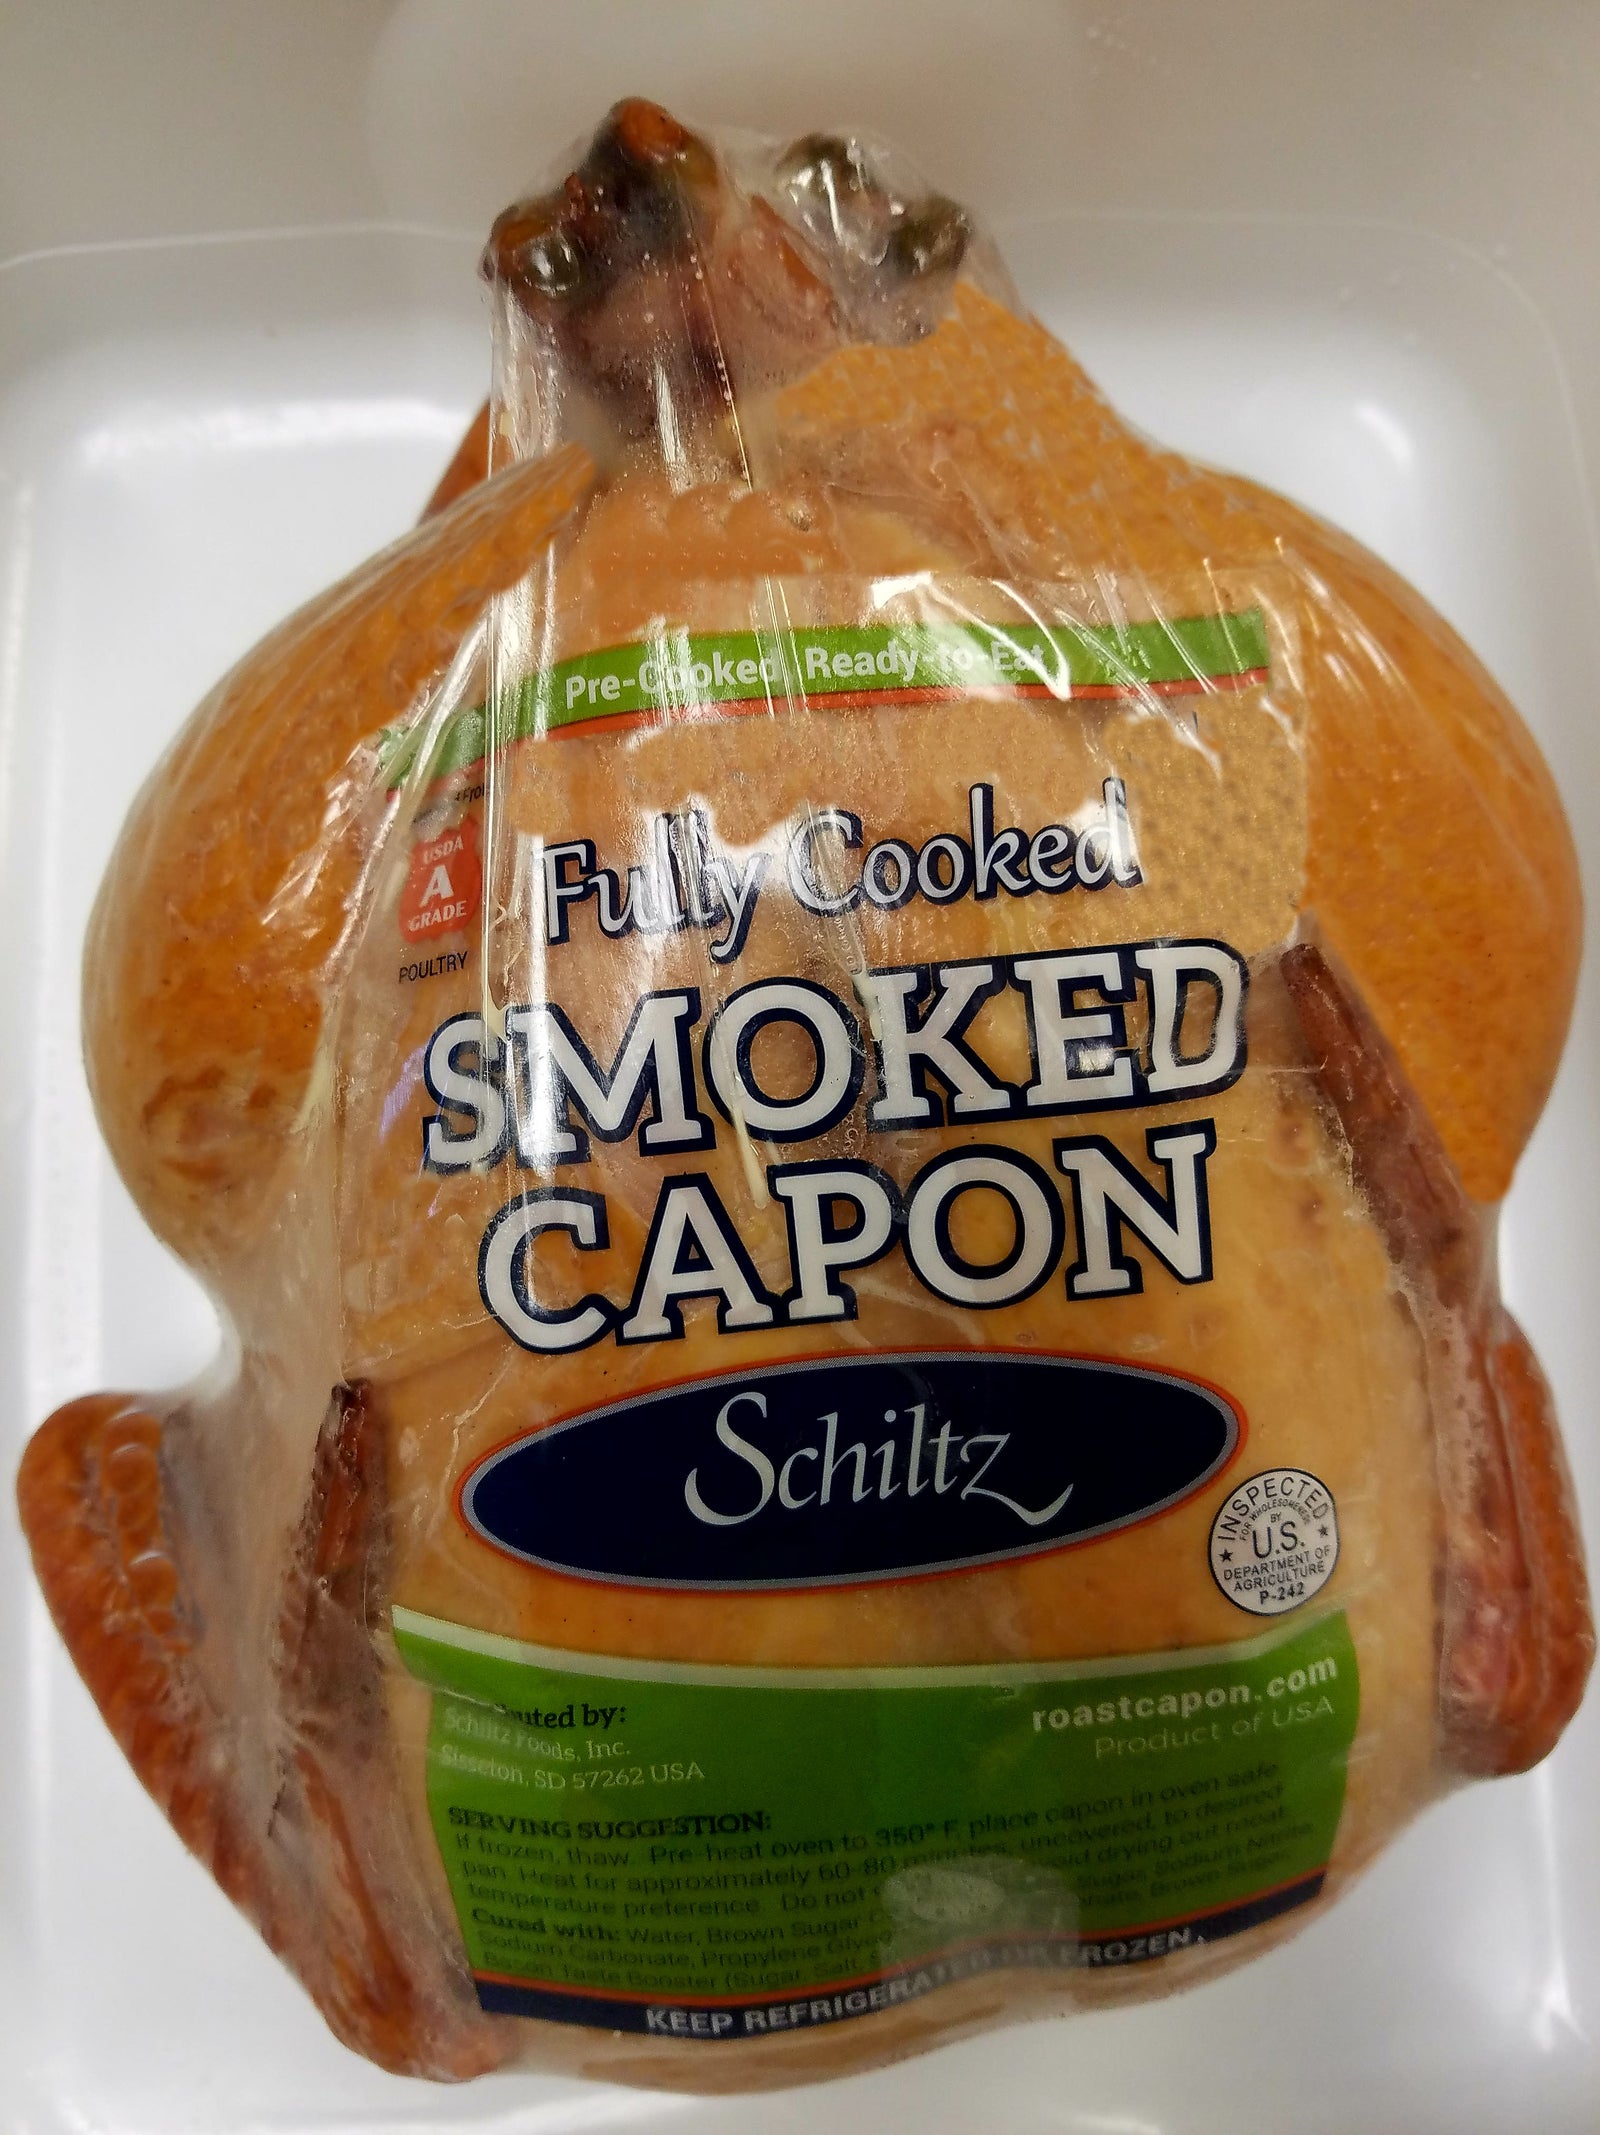 There's not a better company to Buy Goose and Capon Online